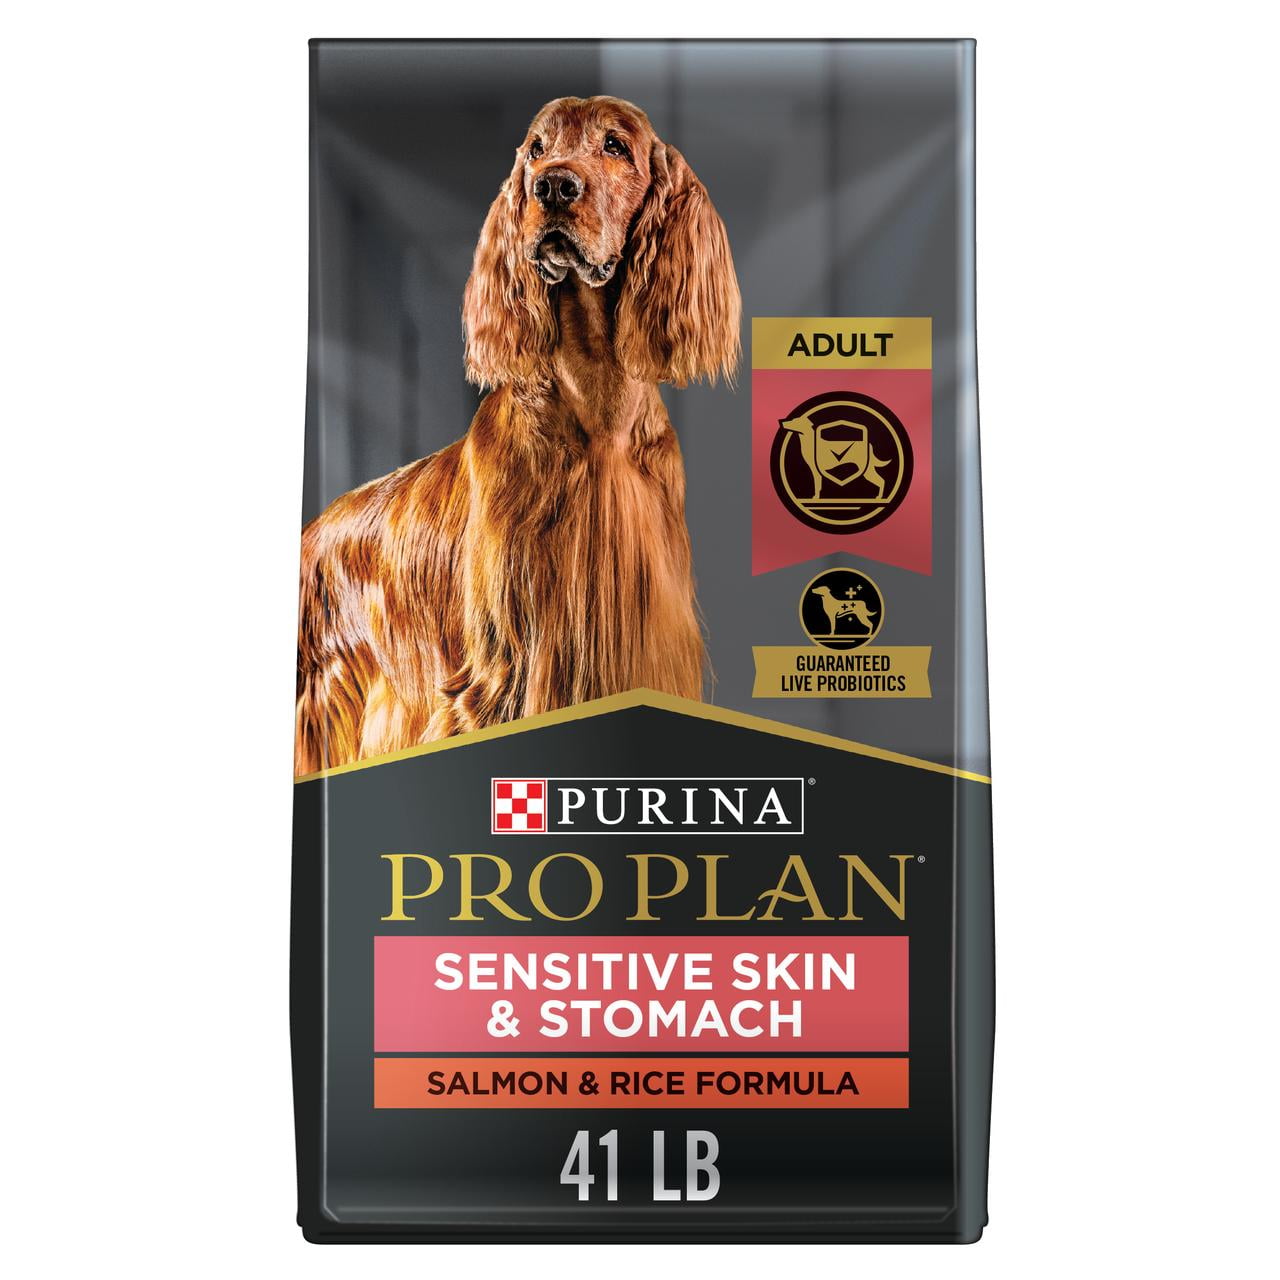 Purina Pro Plan Sensitive Skin and Stomach Dog Food With Probiotics for